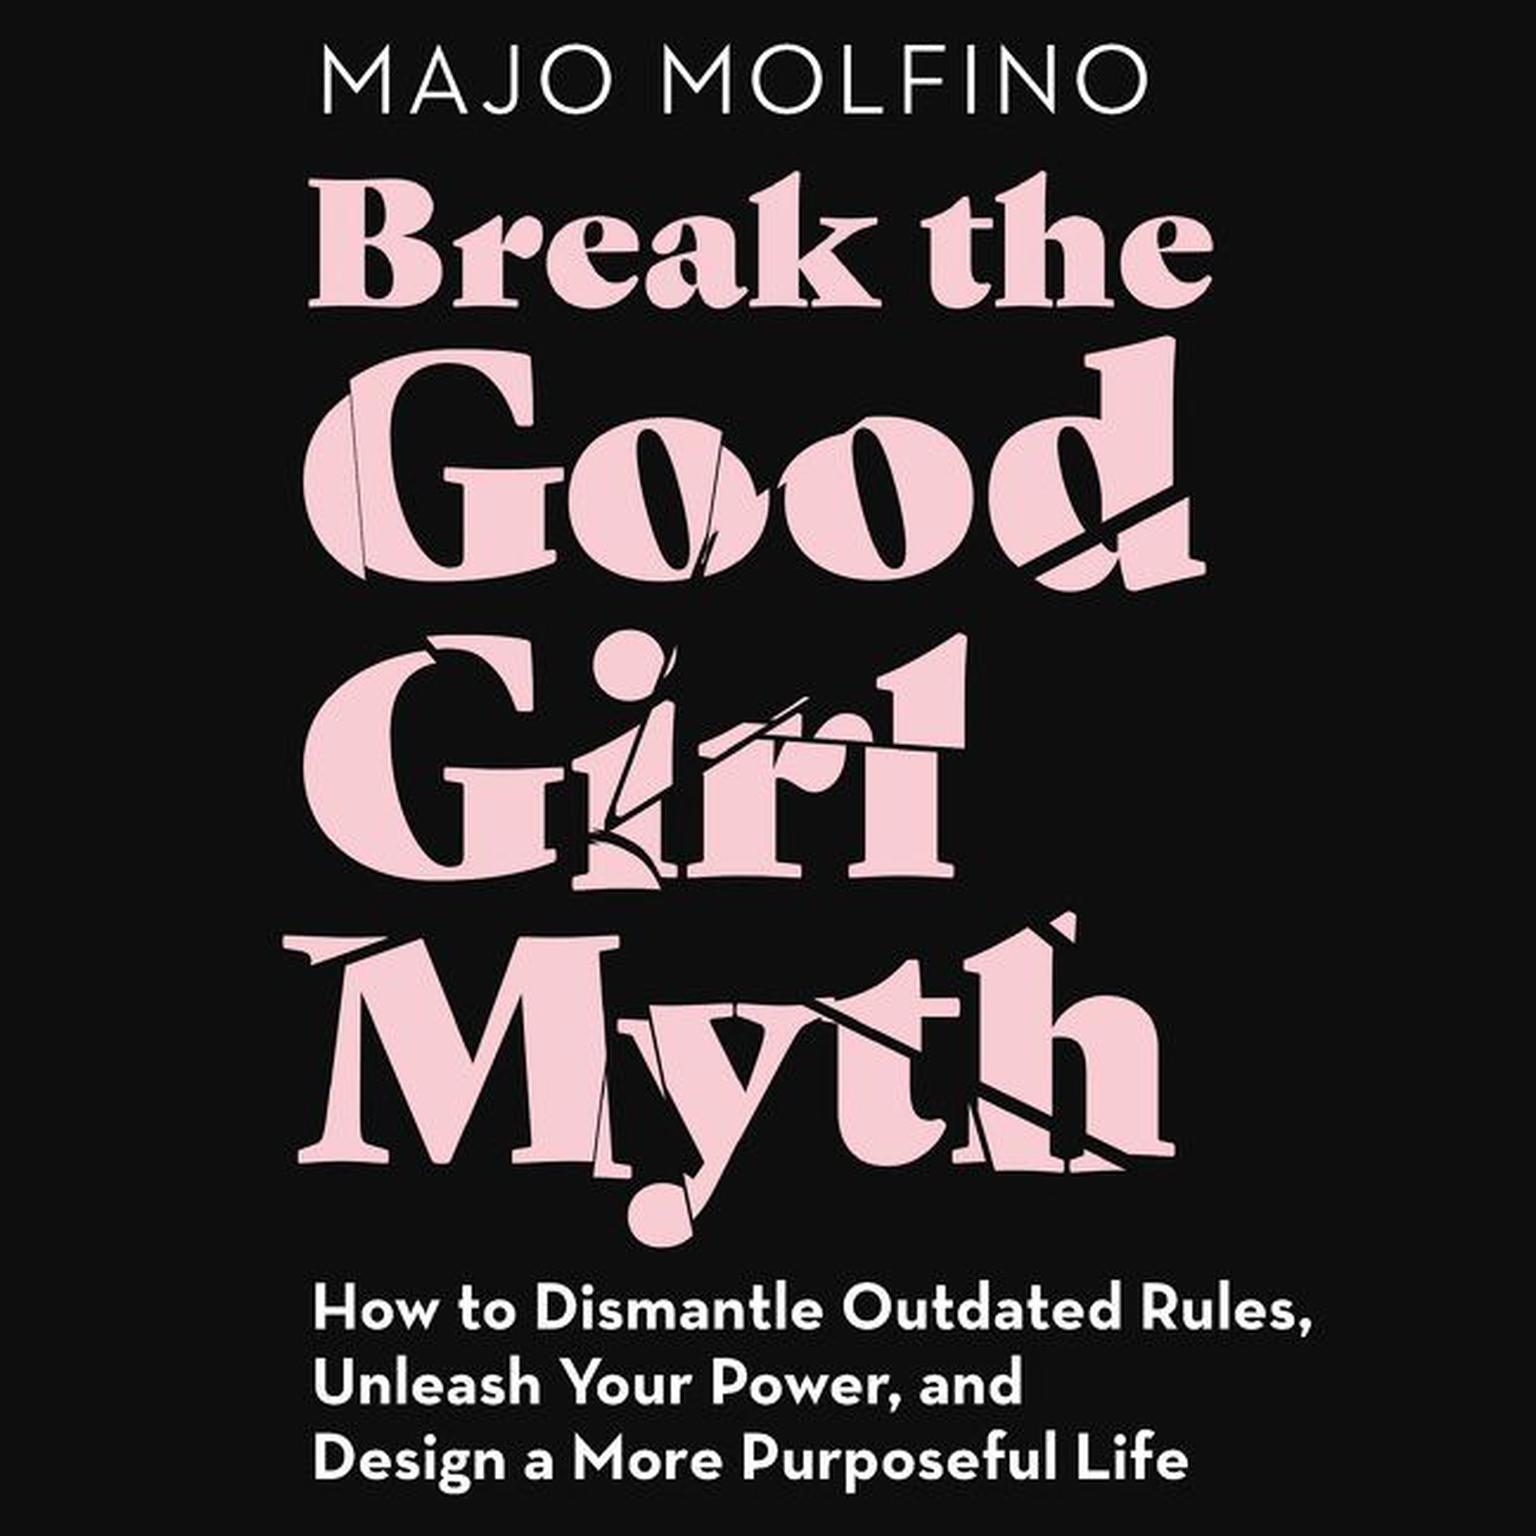 Break the Good Girl Myth: How to Dismantle Outdated Rules, Unleash Your Power, and Design a More Purposeful Life Audiobook, by Majo Molfino